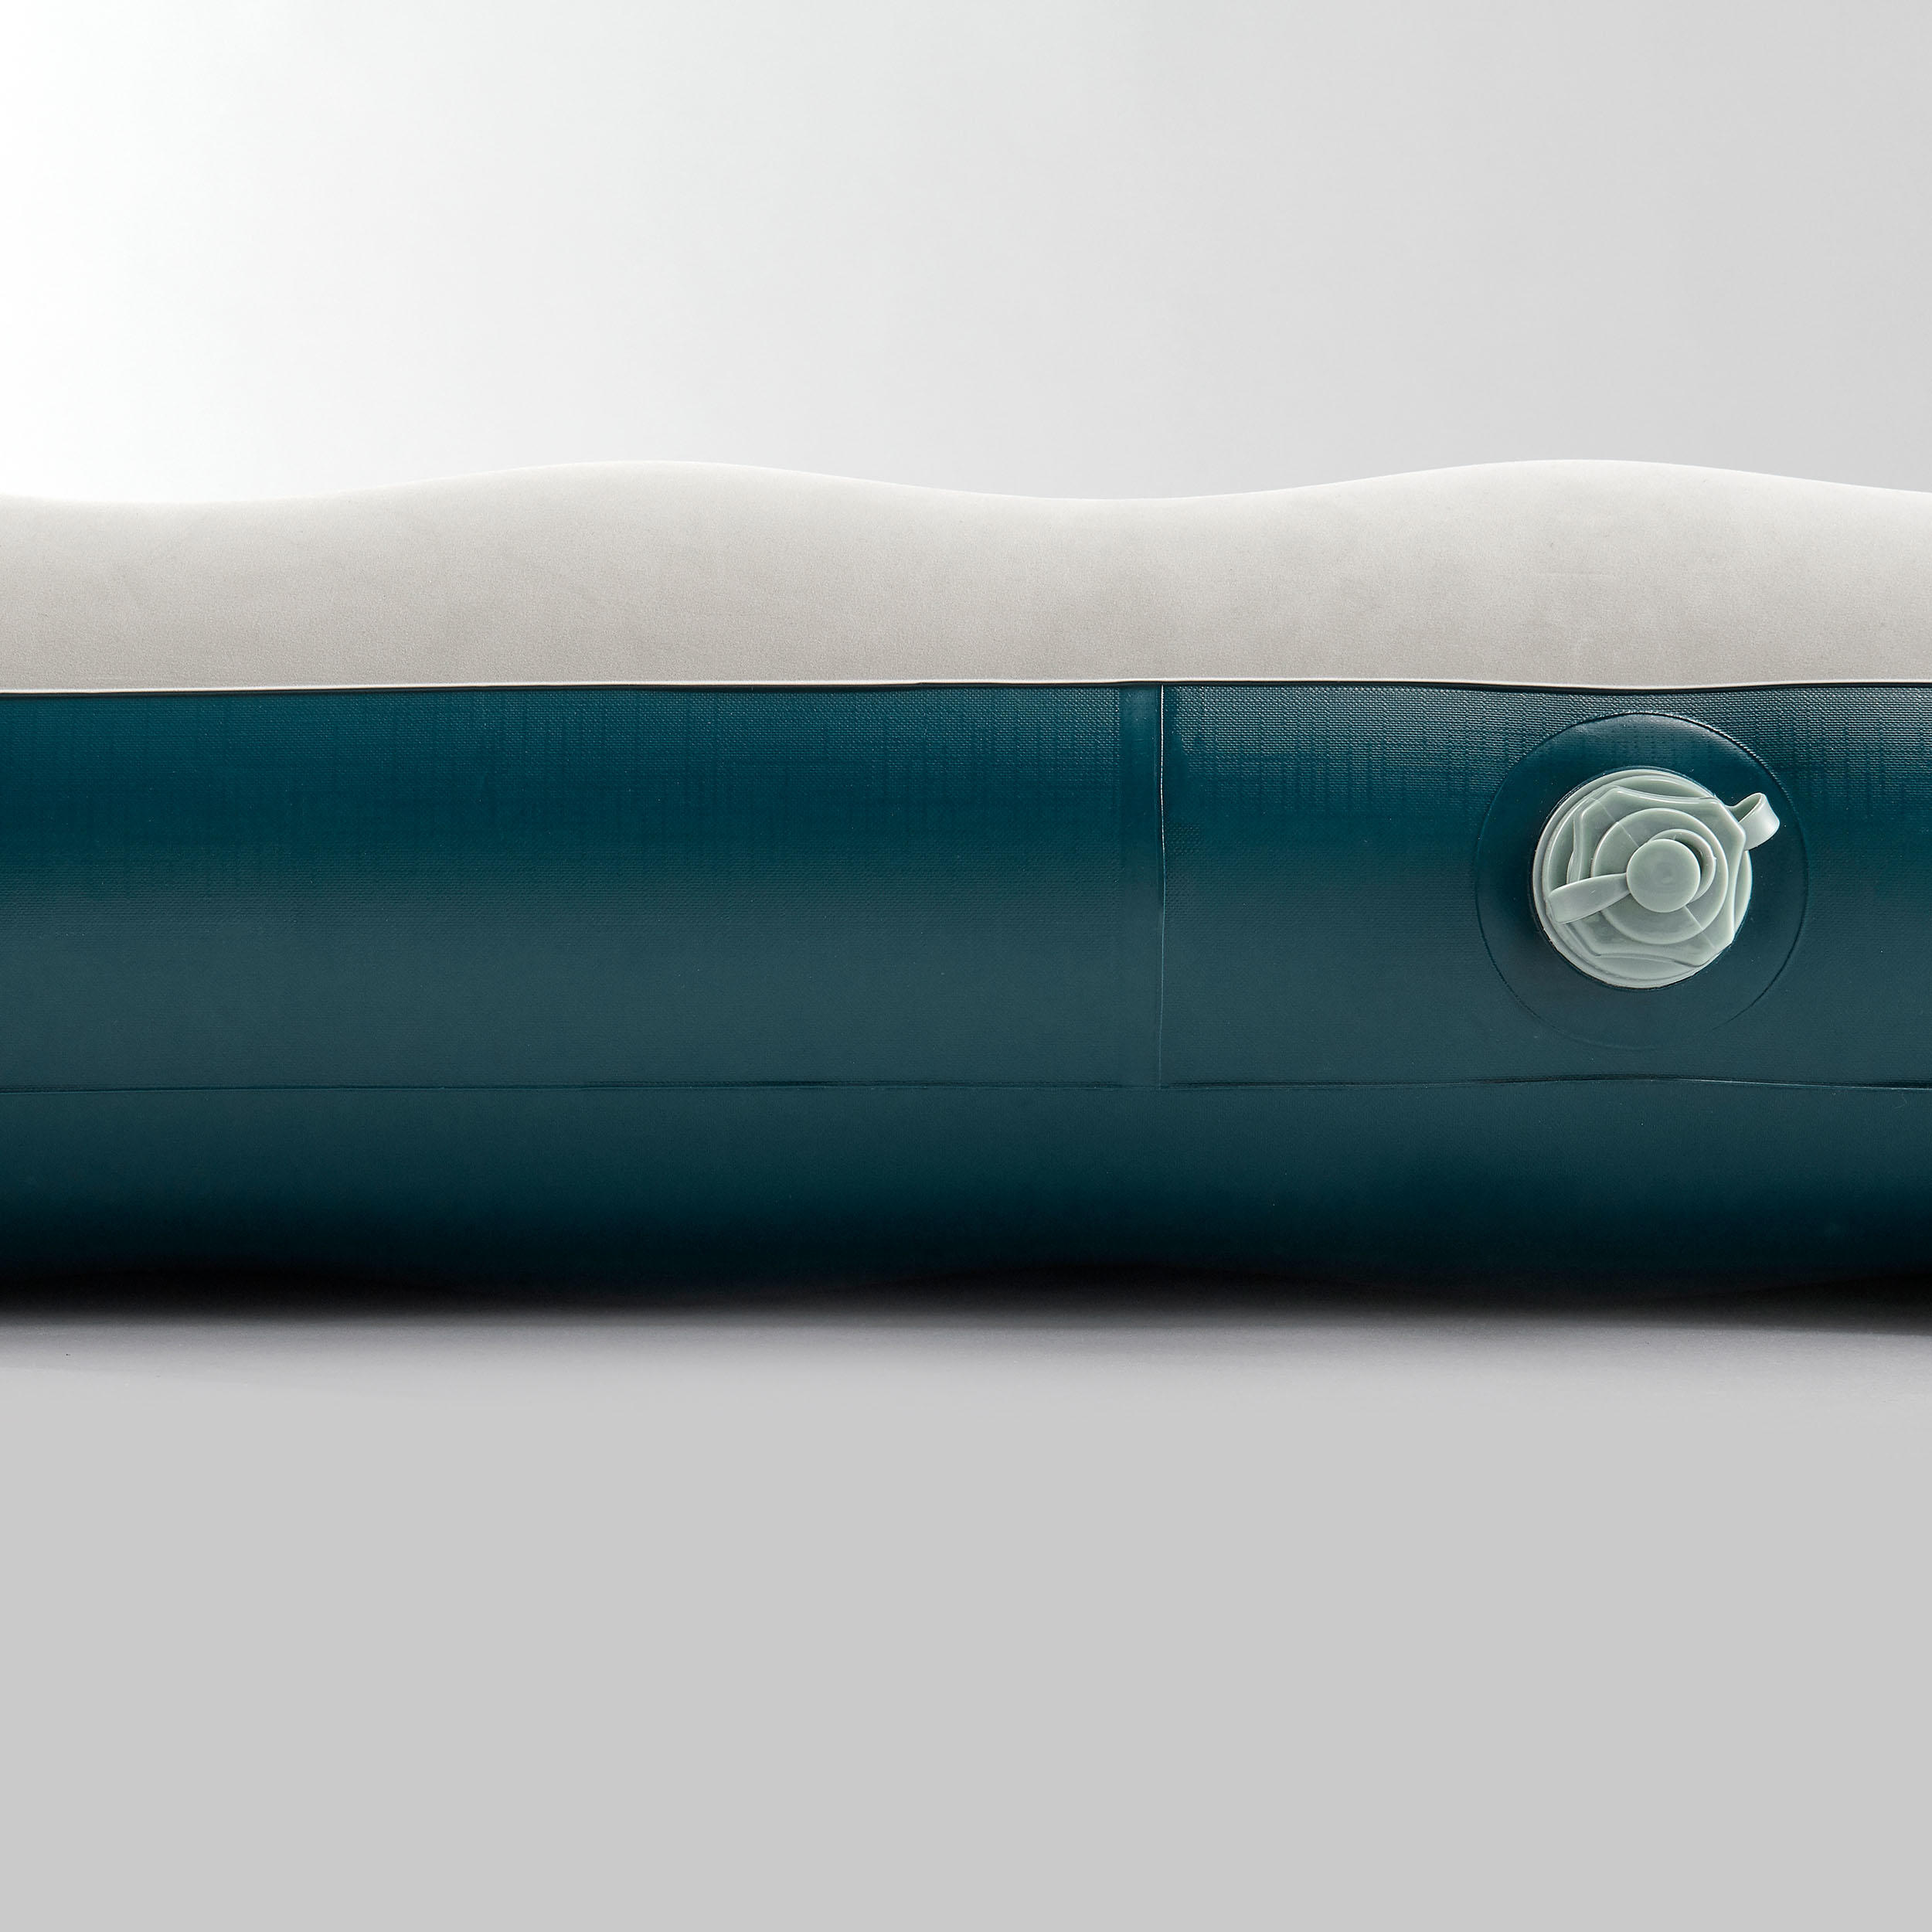 Inflatable Camping Mattress - Air Basic 140 cm - 2 Person 7/10